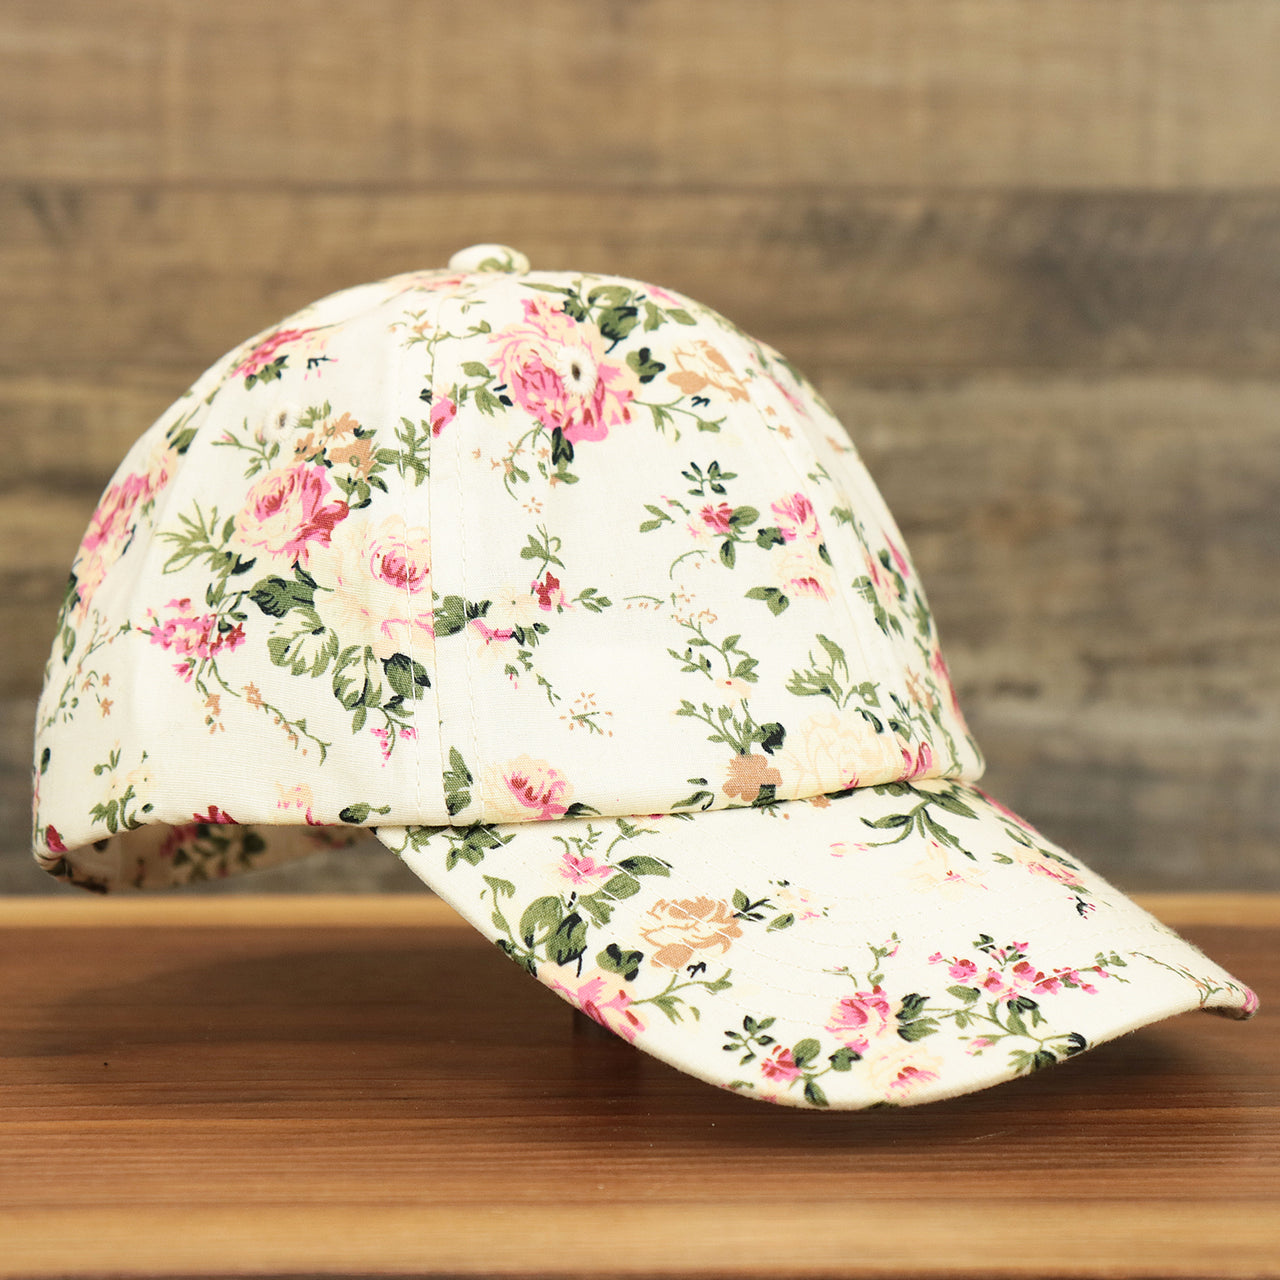 The Kid’s Floral Print Blank Adjustable Baseball Hat | Youth Cream Dad Hat